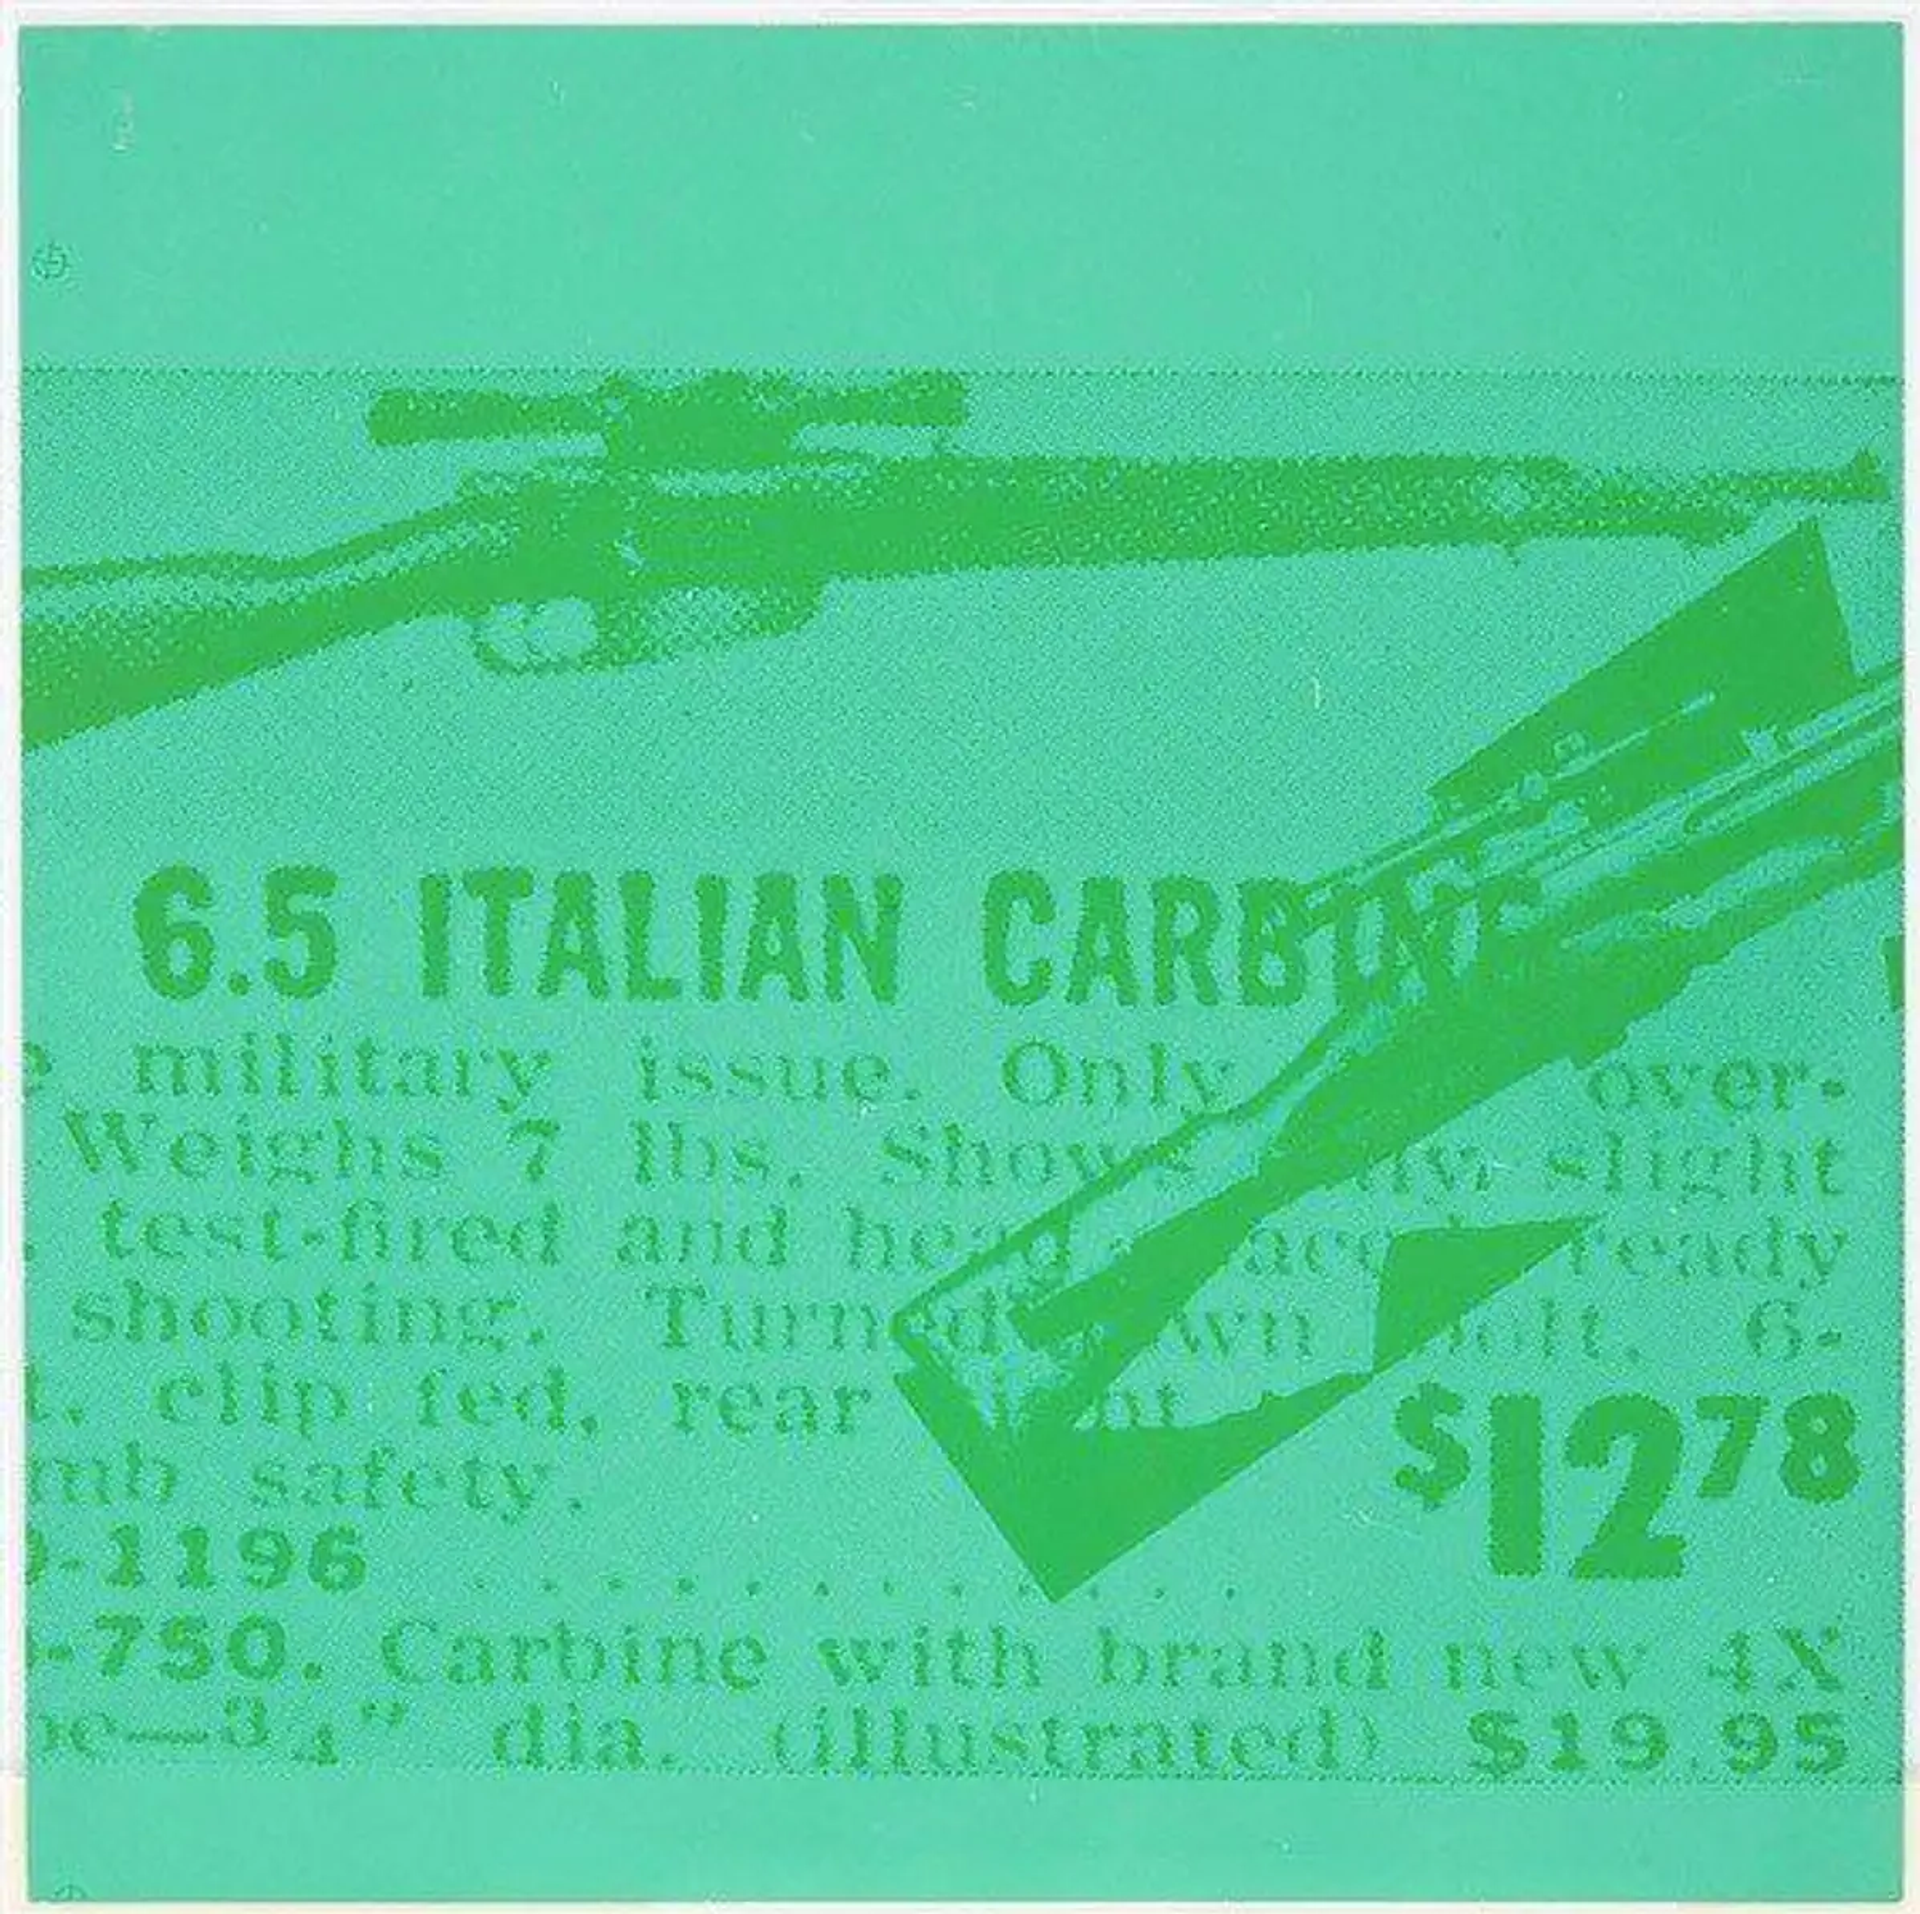 This print shows an image of the gun used by Lee Harvey Oswald, the American sniper who assassinated President Kennedy. It is done in tones of green.